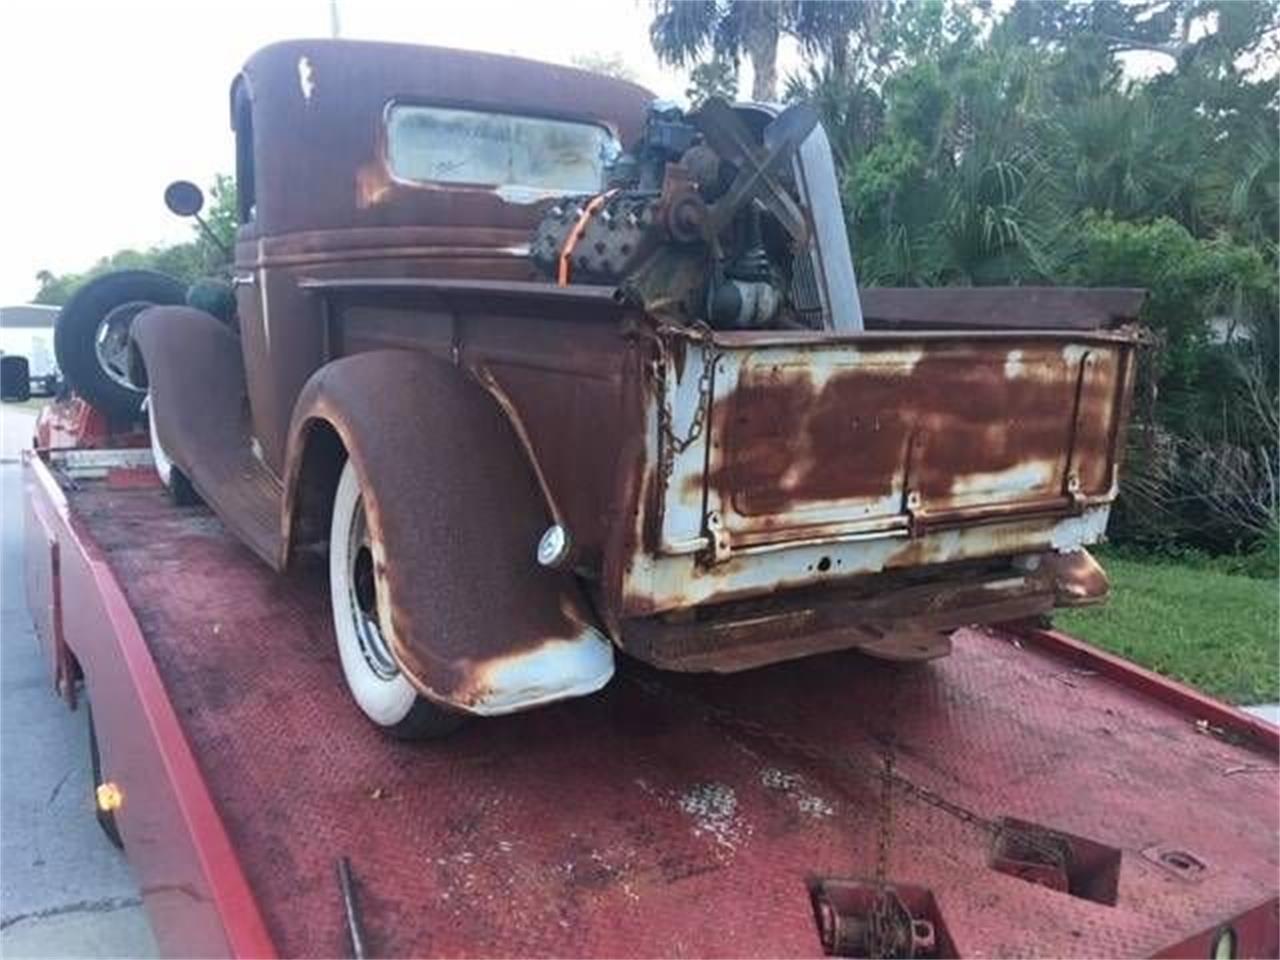 1936 Ford 1/2 Ton Pickup for Sale | ClassicCars.com | CC ...